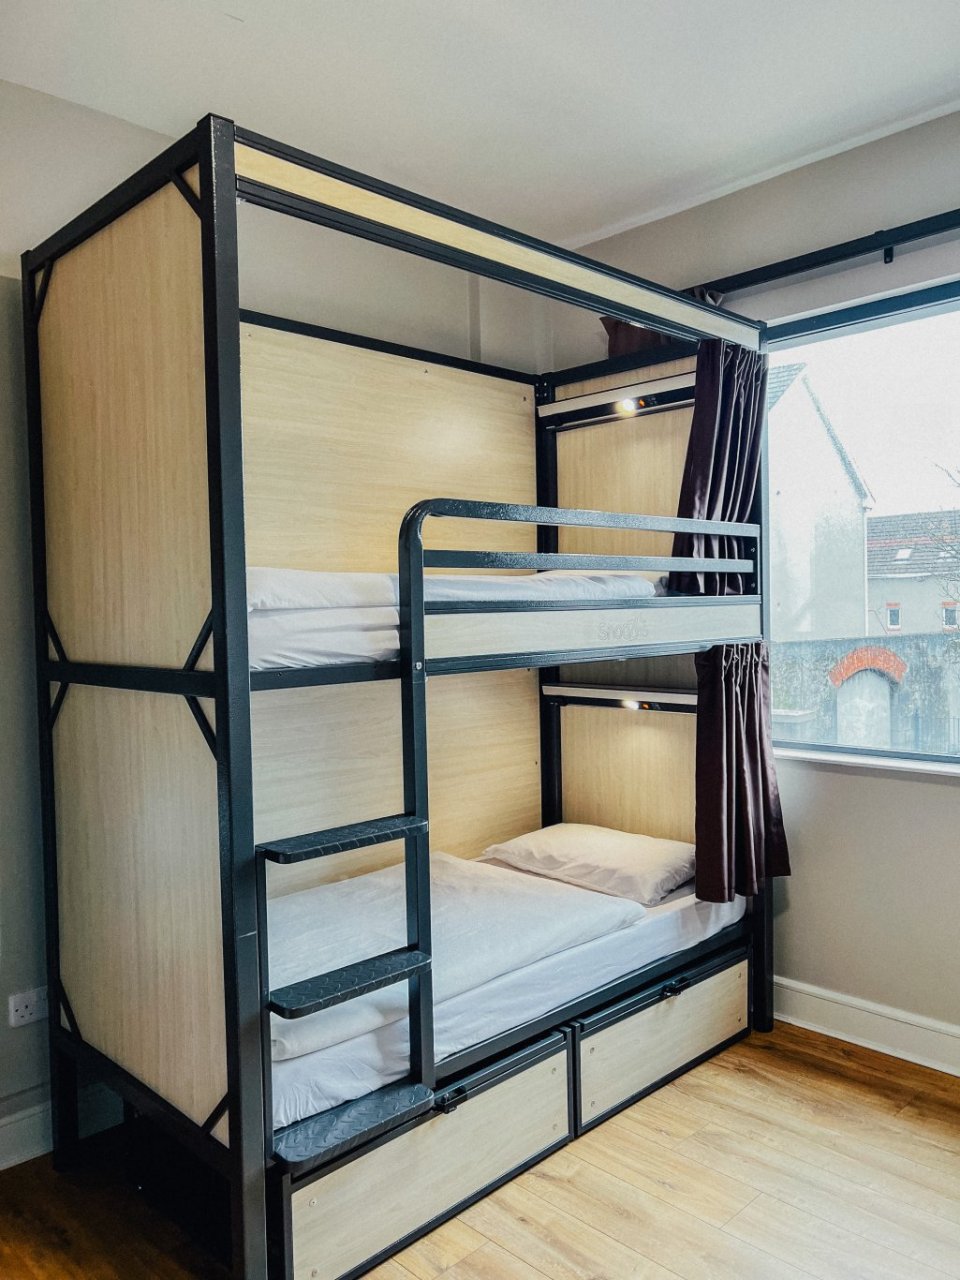 Cream-coloured Bunk Beds with Privacy Curtains by the Window in Modern Student Group Hostel